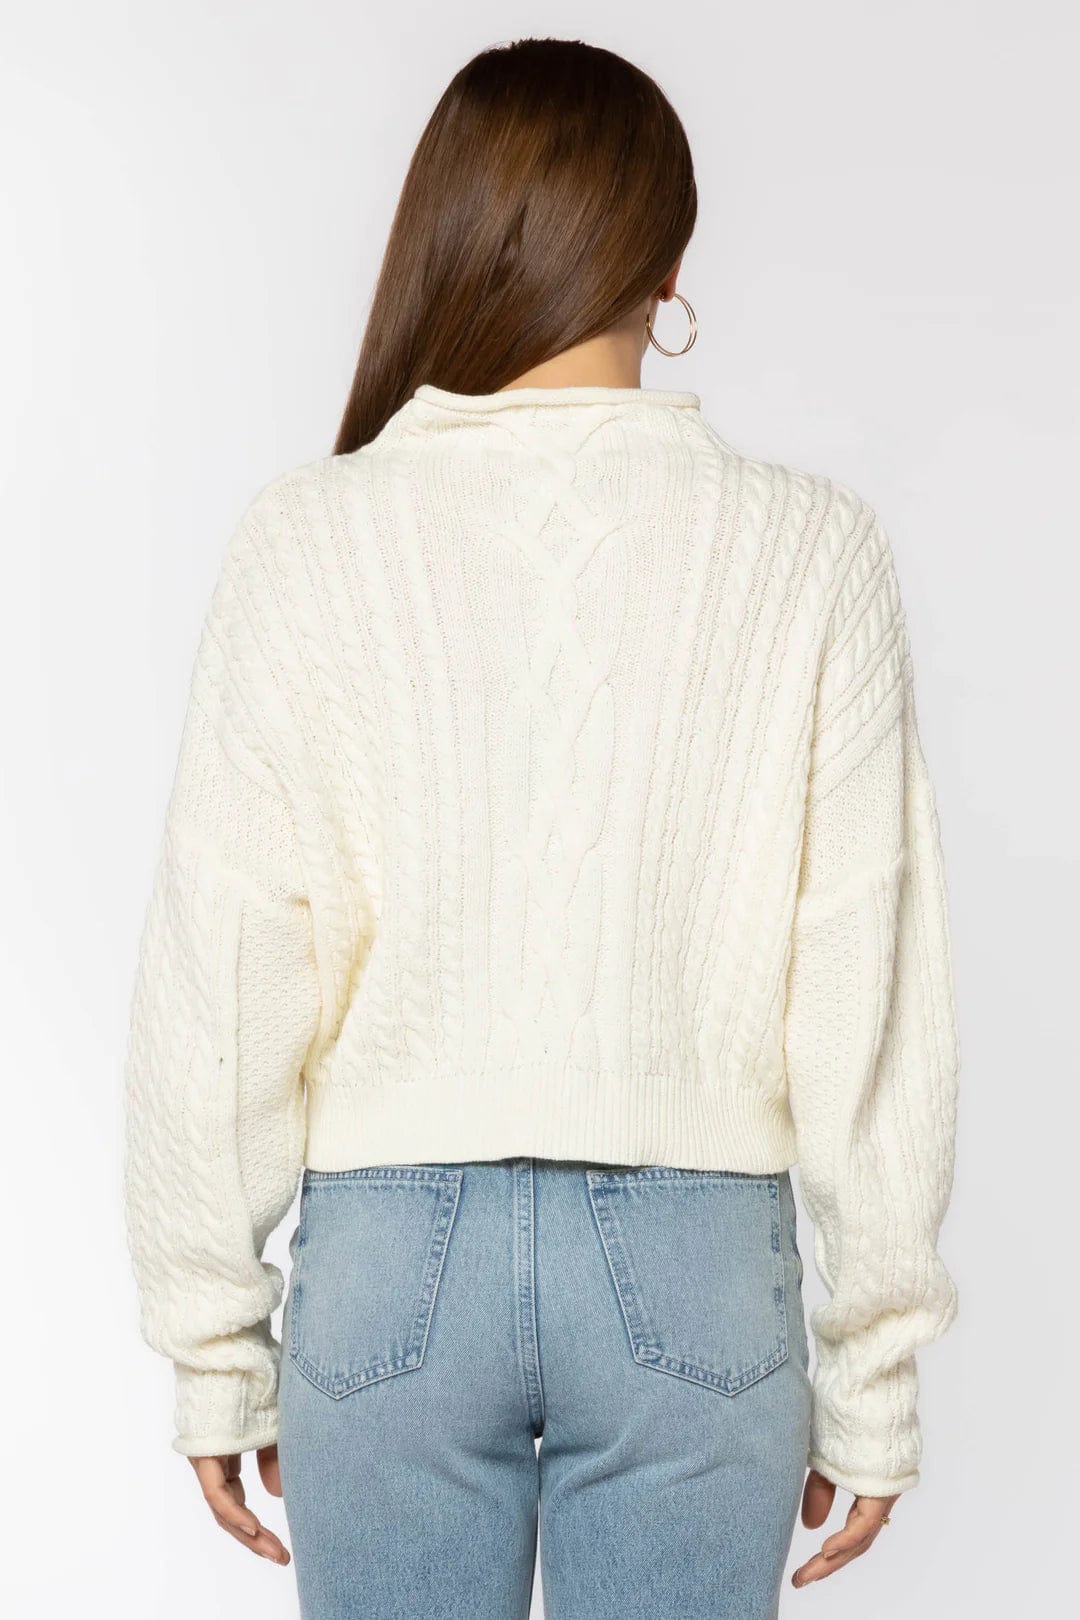 Cream cable knit Jennevie Sweater by Velvet Heart